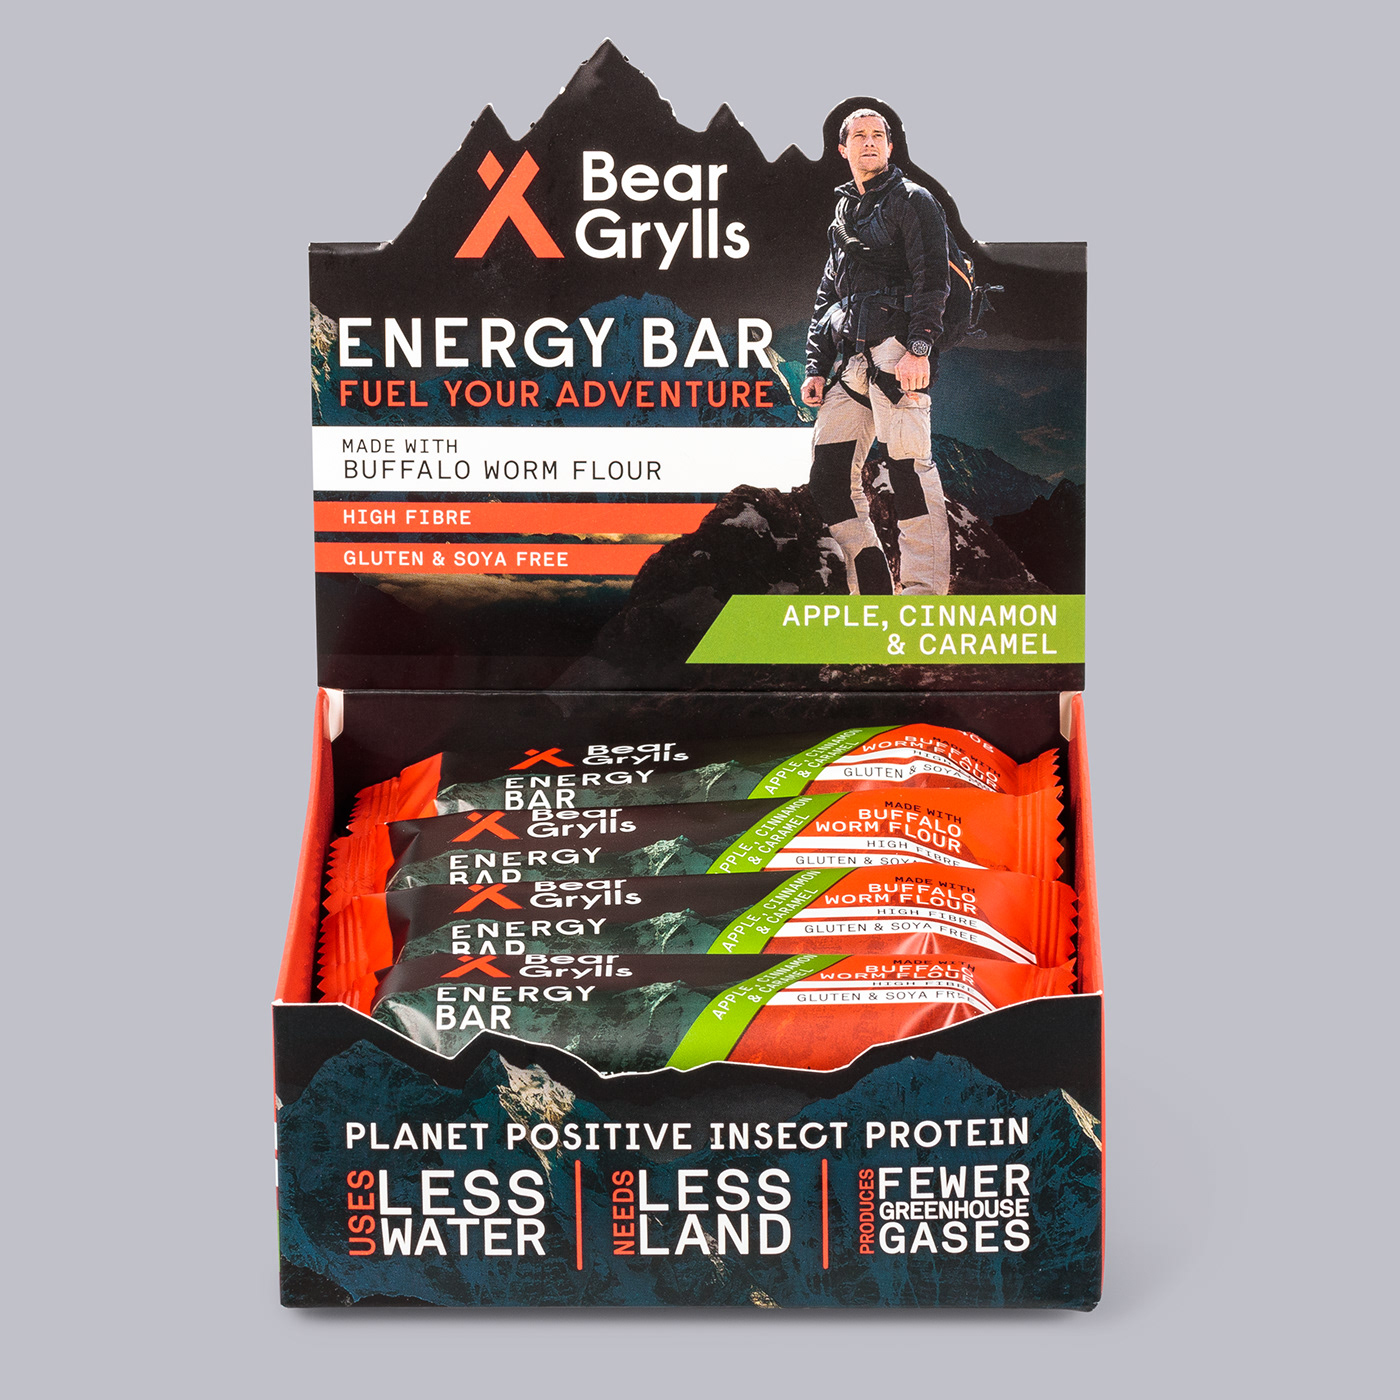 adventure bar bear grylls buffalo worm energy environmentally friendly Insects mountains natural protein